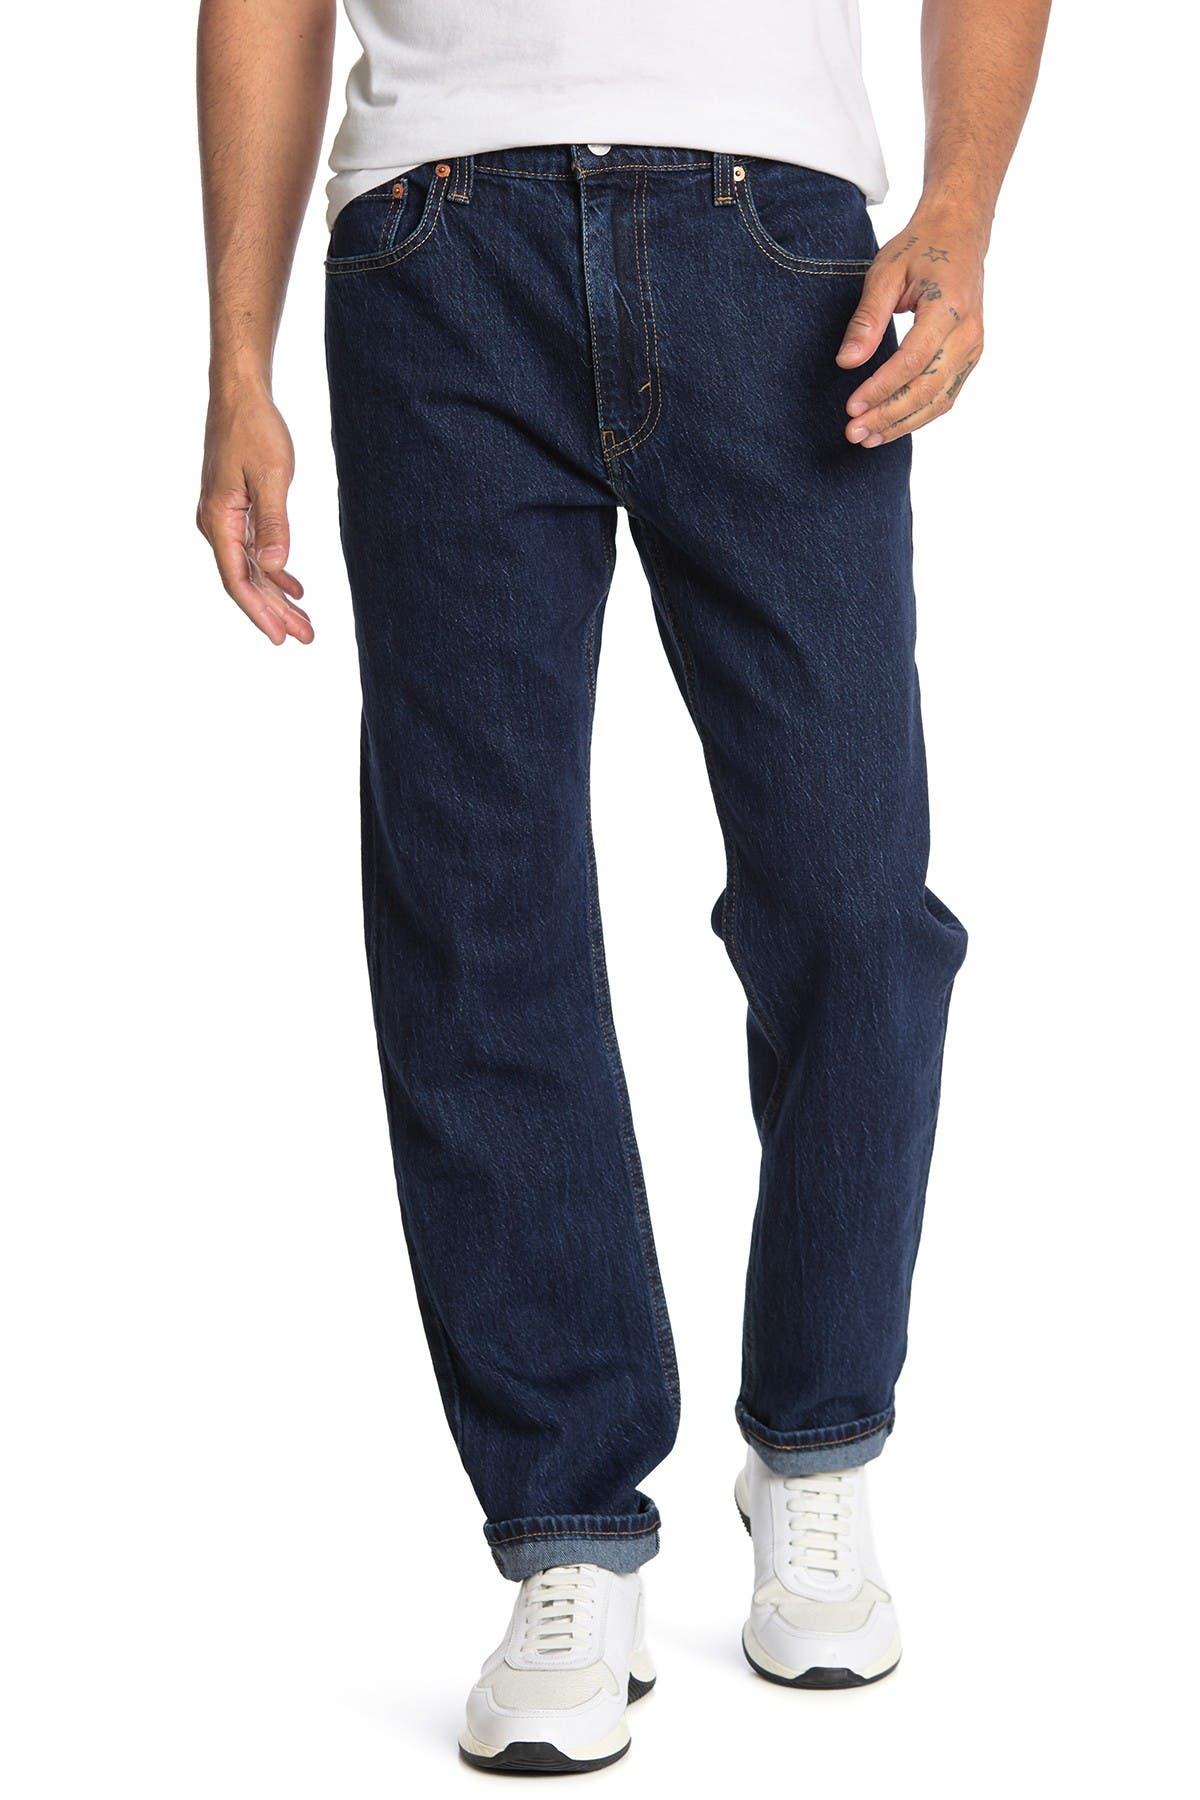 Levi's 502 Tapered Jeans In Medium Blue